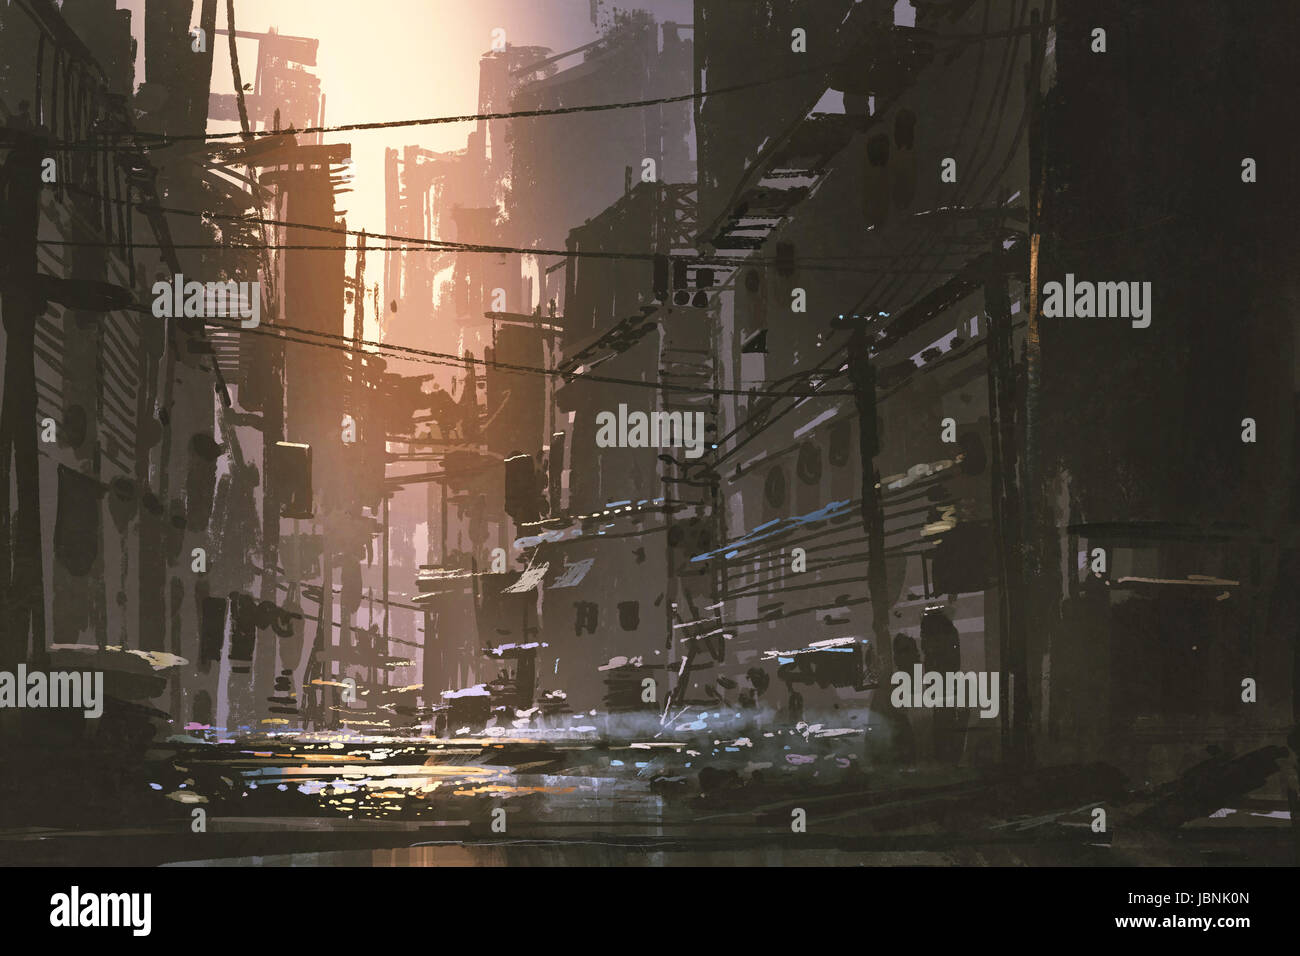 scenery of dirty street in abandoned city at sunset with digital art style, illustration painting Stock Photo